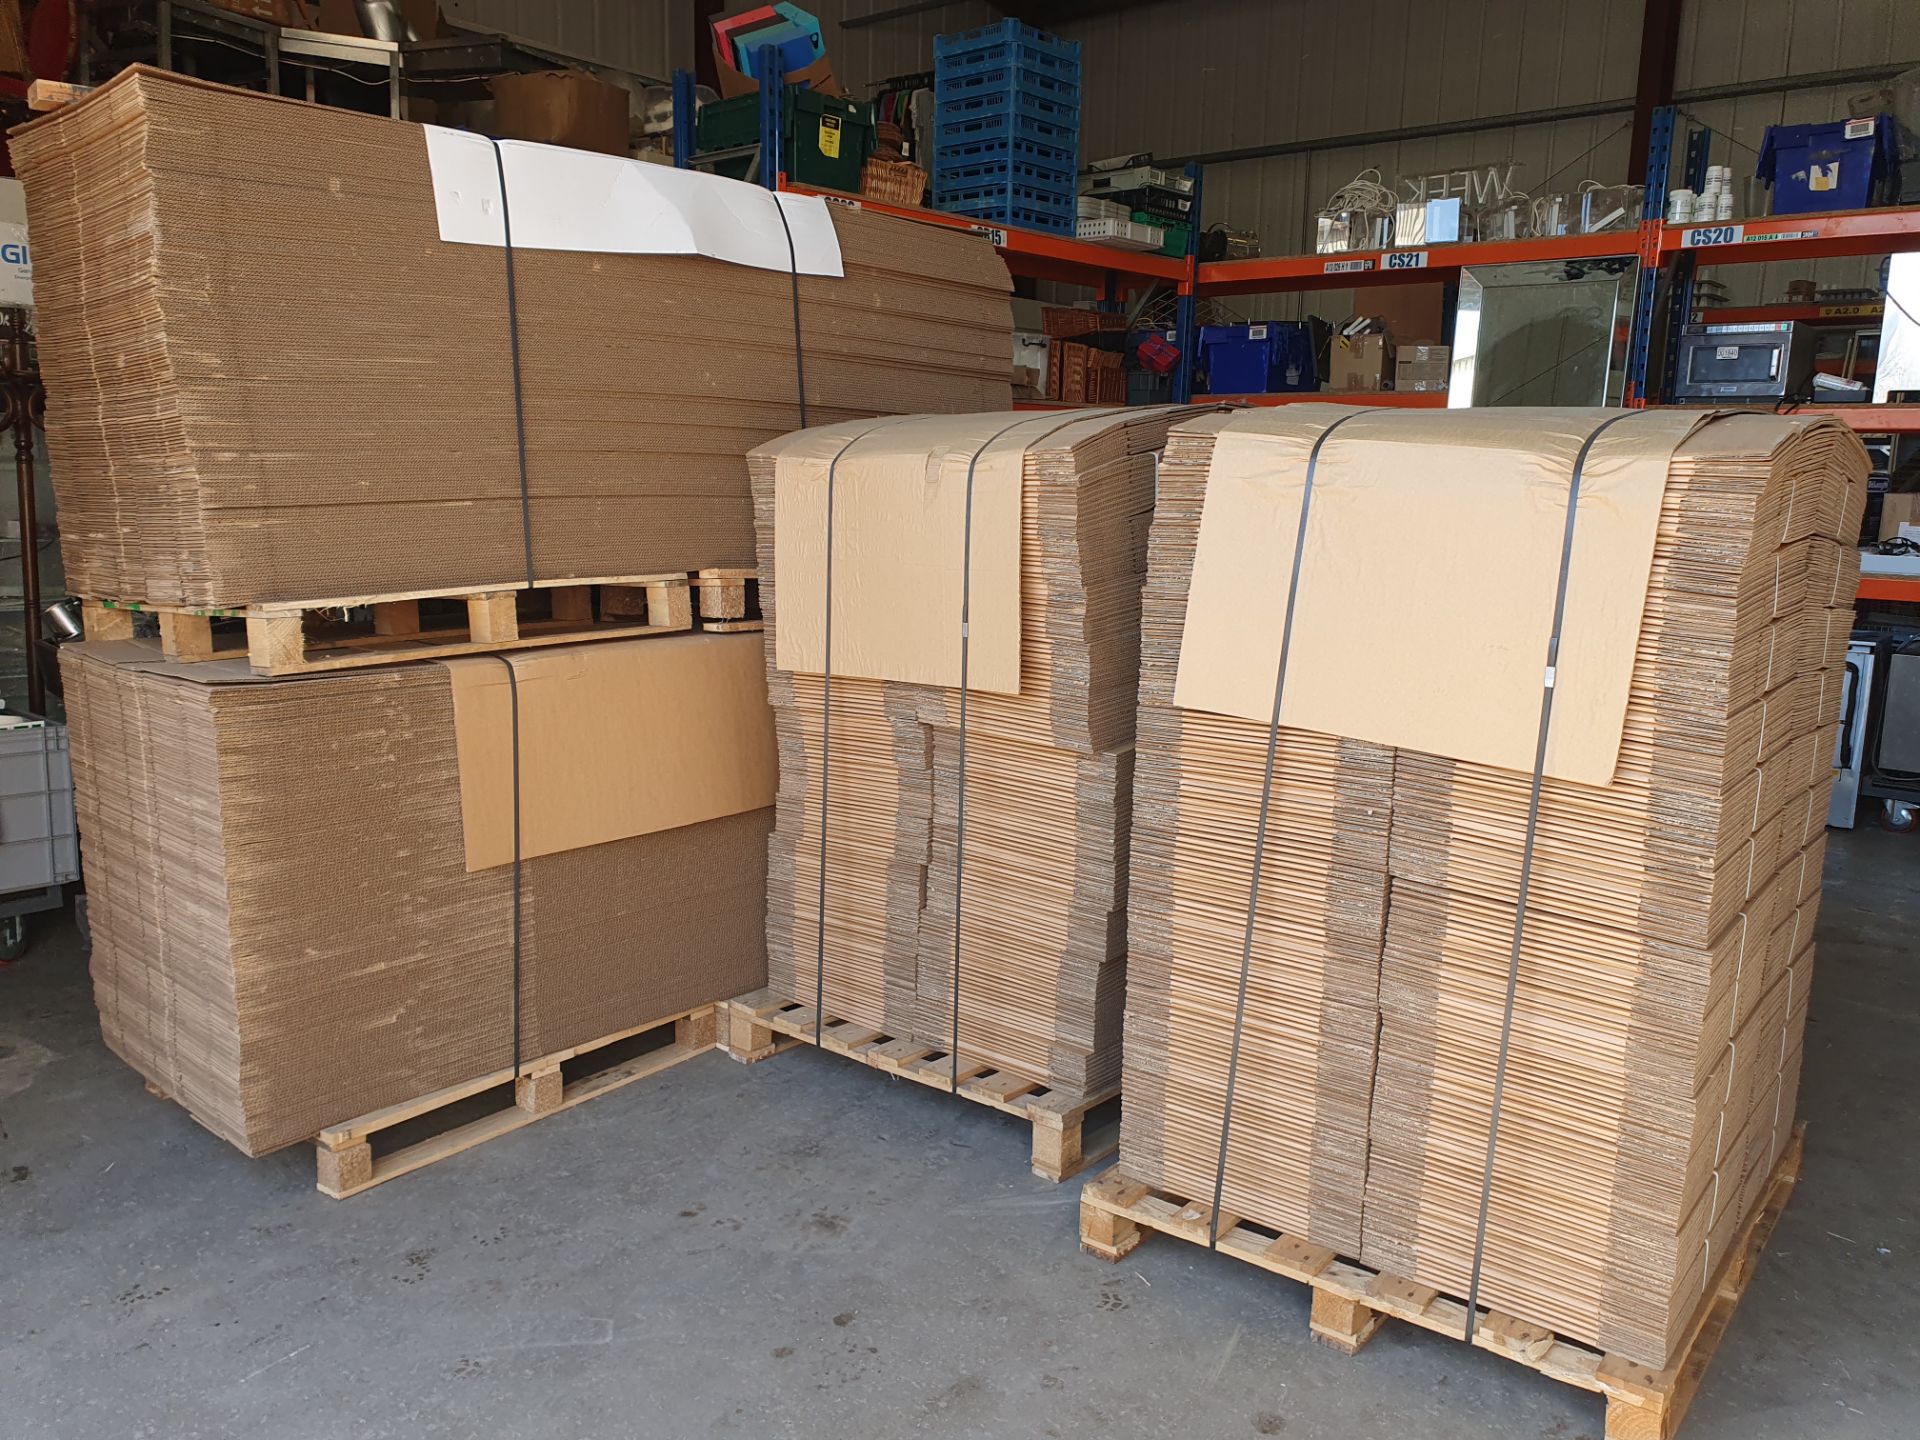 * 4 pallets packing boxes